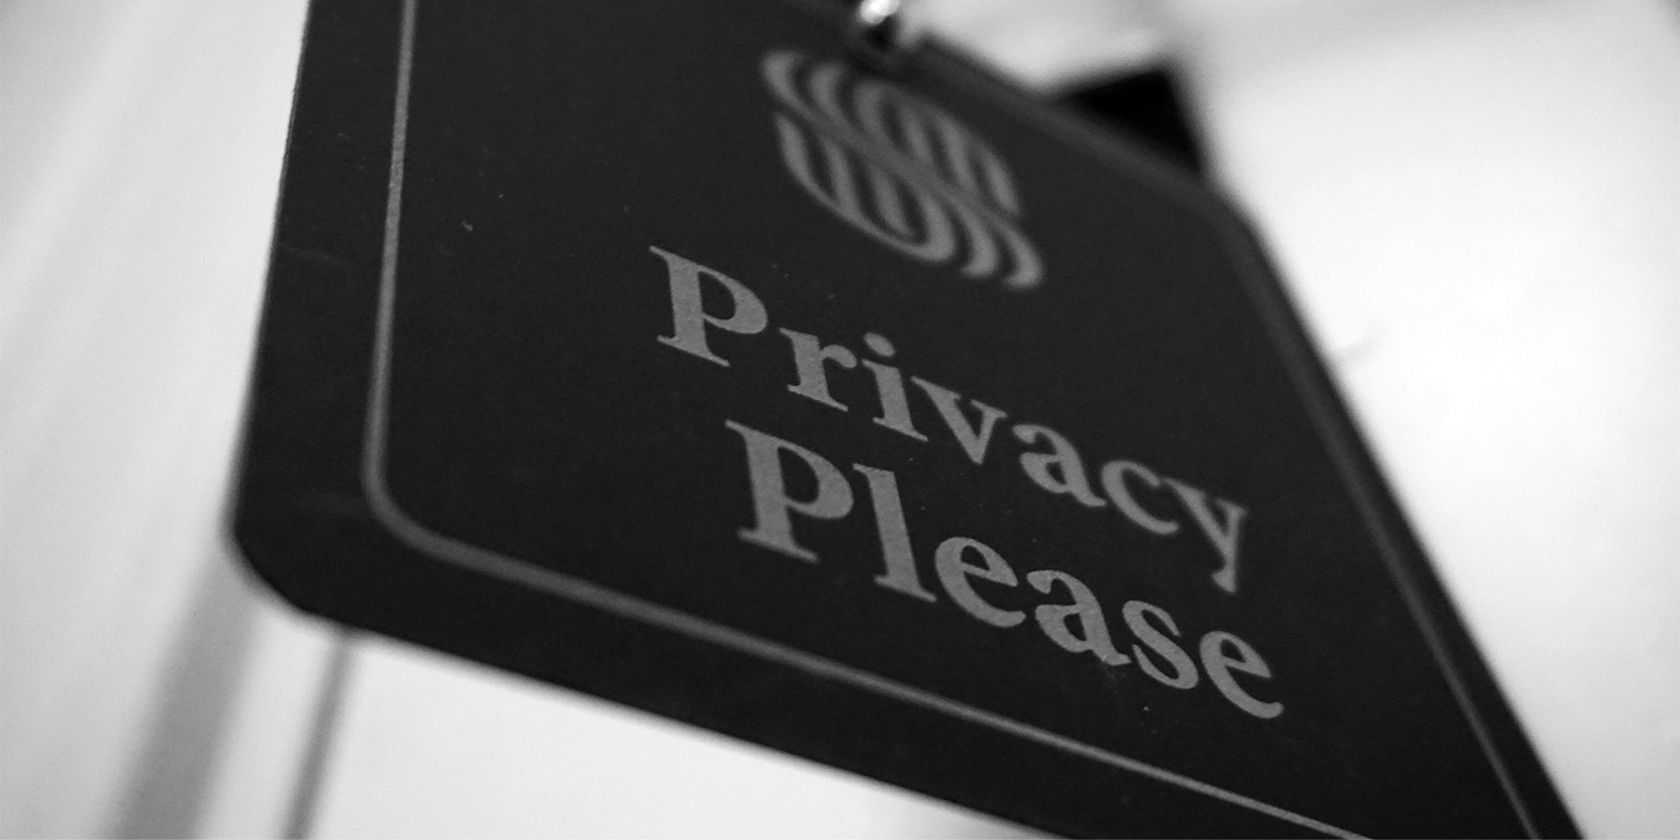 privacy please sign